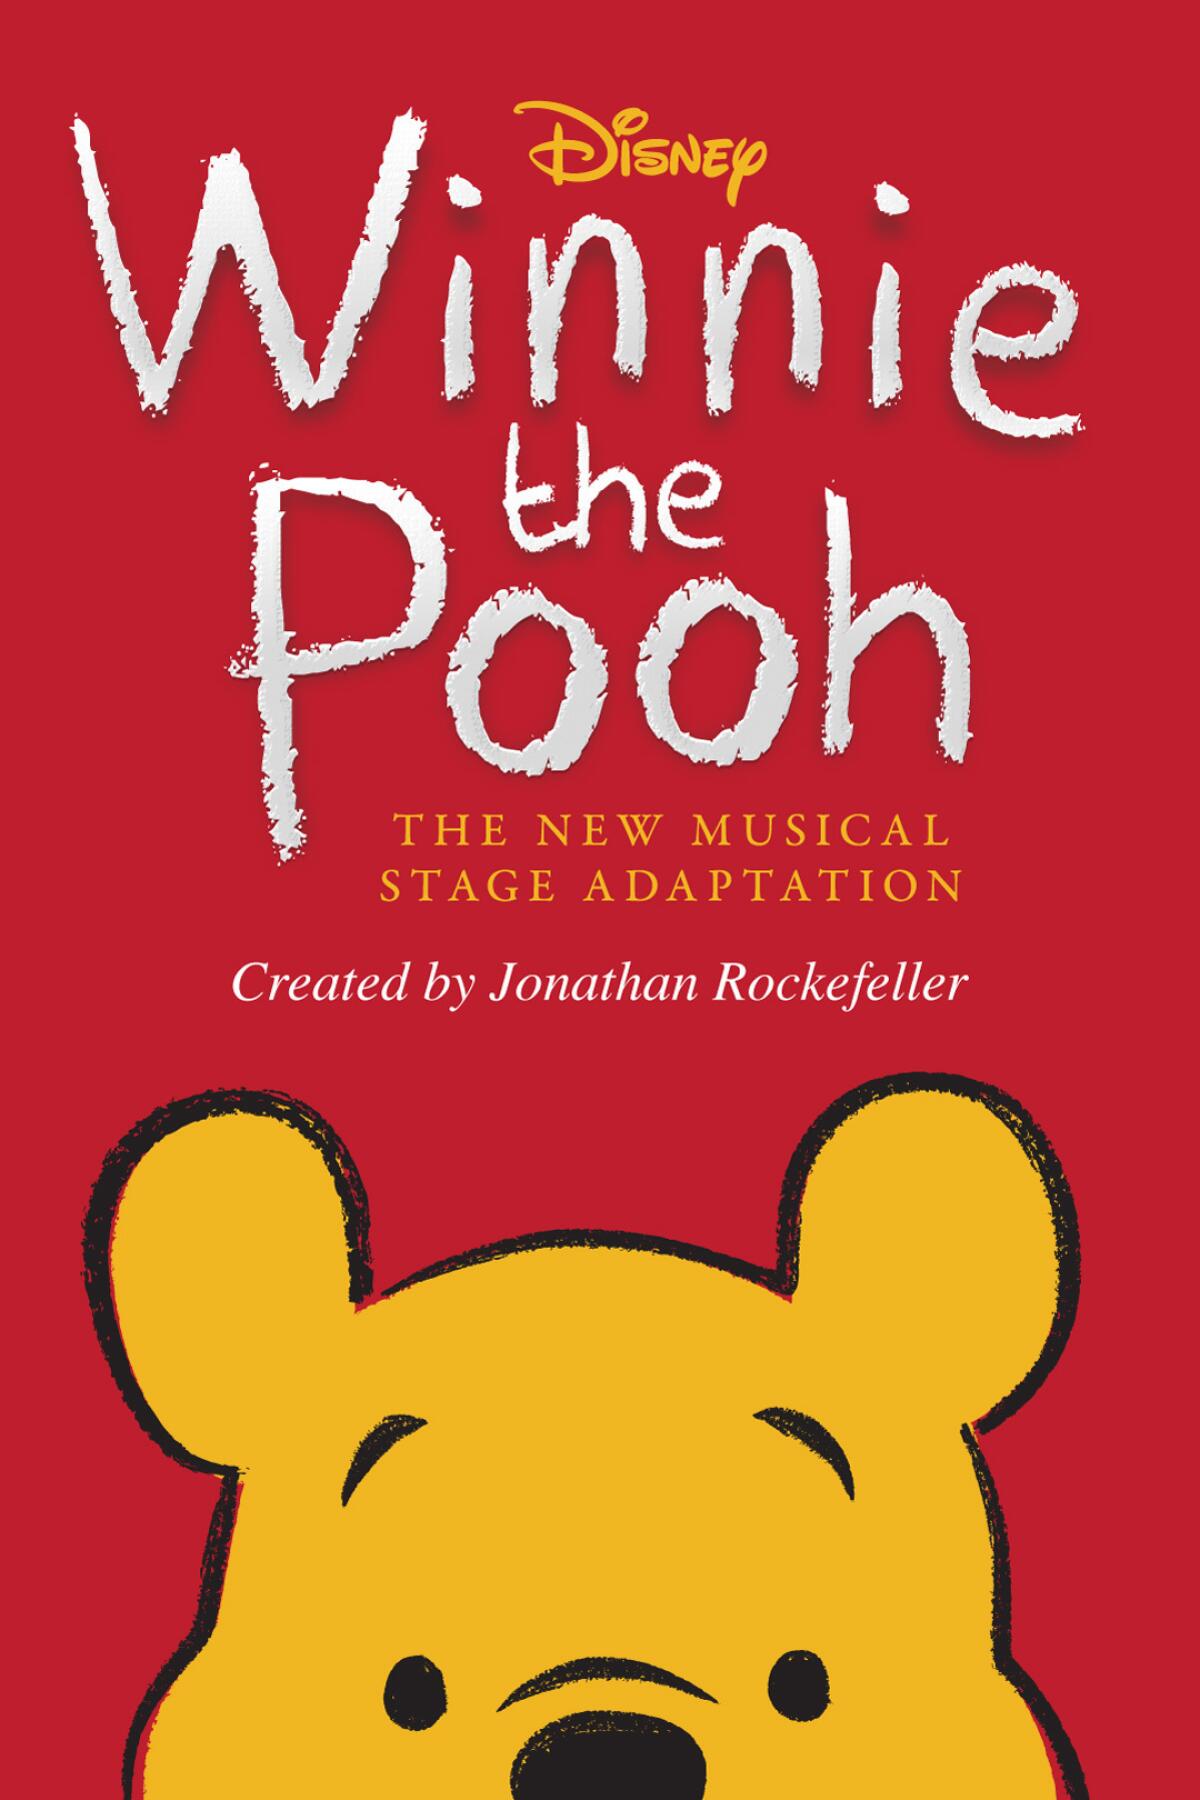 "Winnie the Pooh: The New Musical Adaptation".